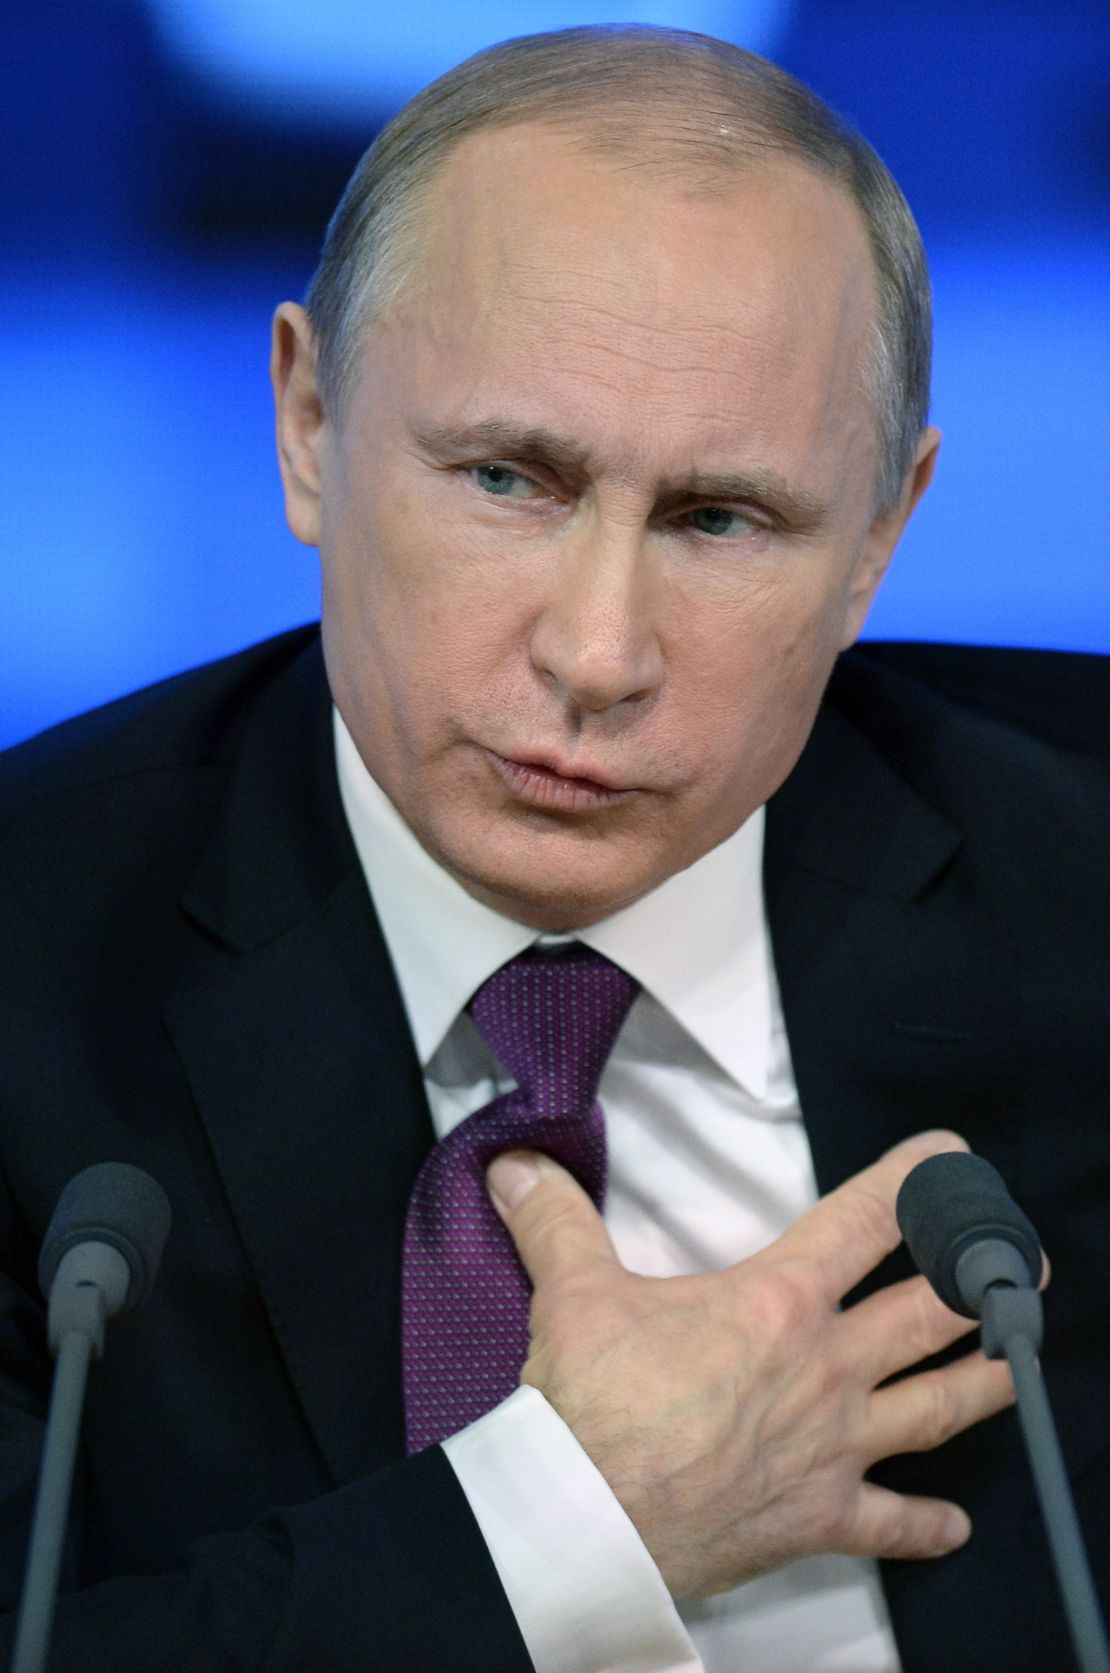 Russian President Vladimir Putin speaks during his annual press conference in Moscow on December 18, 2014.